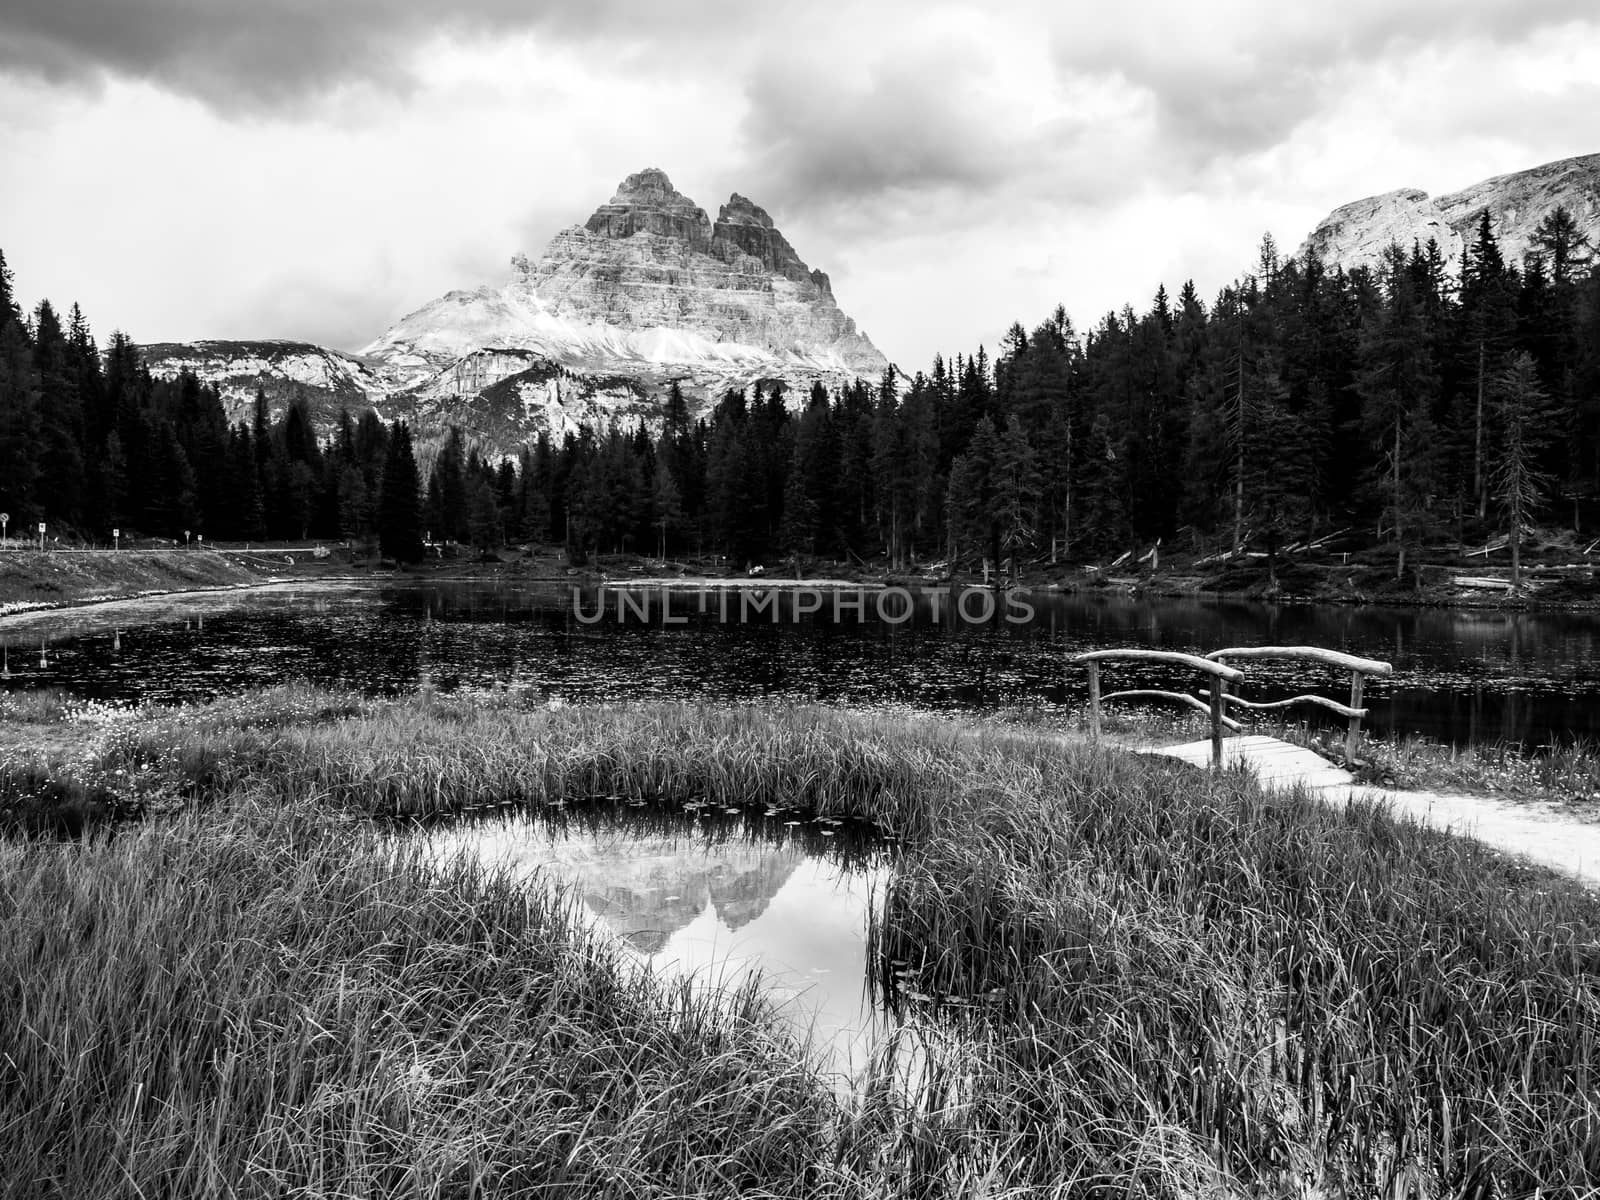 Tre Cime di Lavaredo Mountain reflected in water od Antorno Lake, Dolomites, Italy by pyty